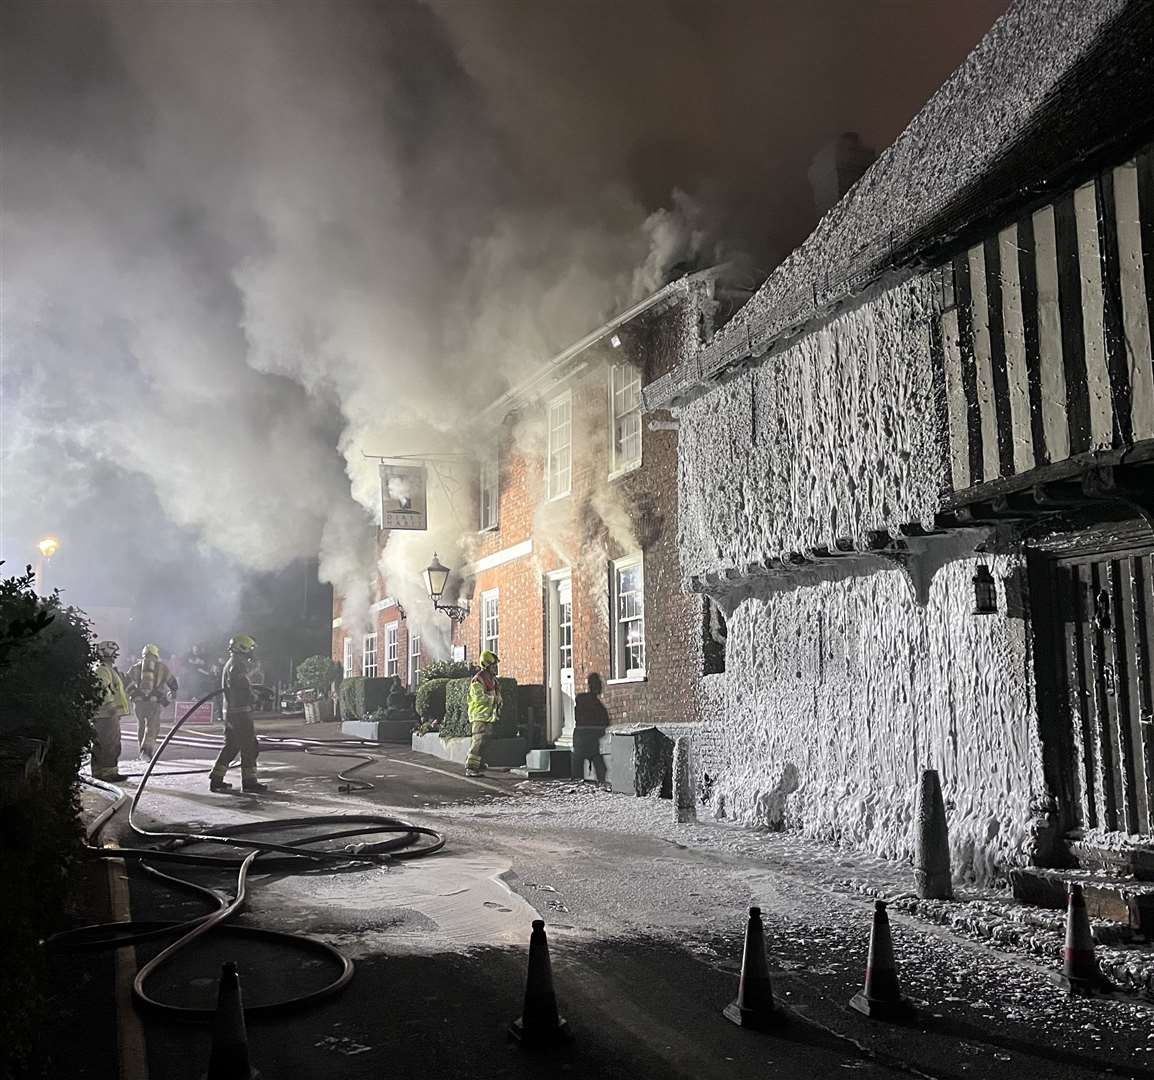 Firefighters doused nearby homes in foam to stop the fire spreading. Picture: John Wills